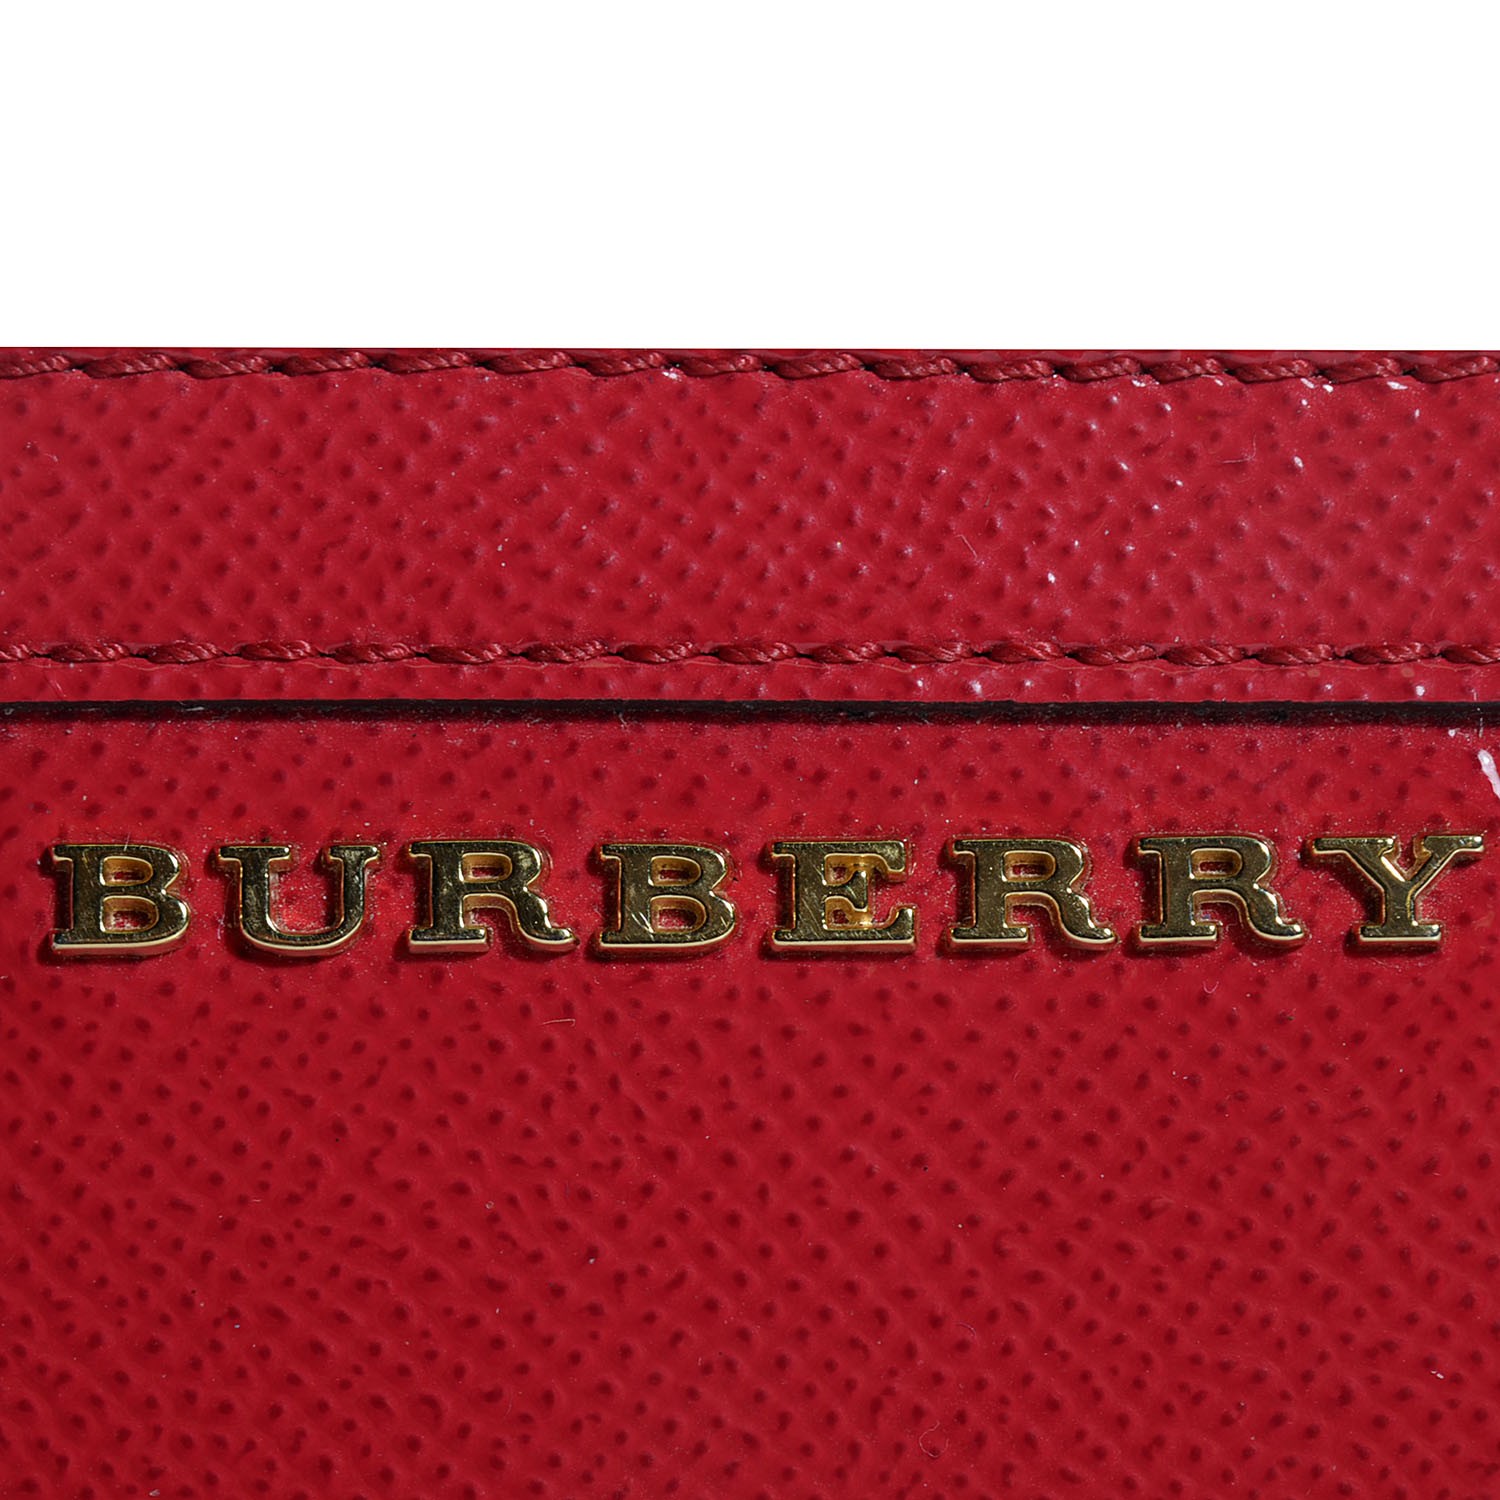 BURBERRY Patent London Compact Wallet Red 101448 | FASHIONPHILE